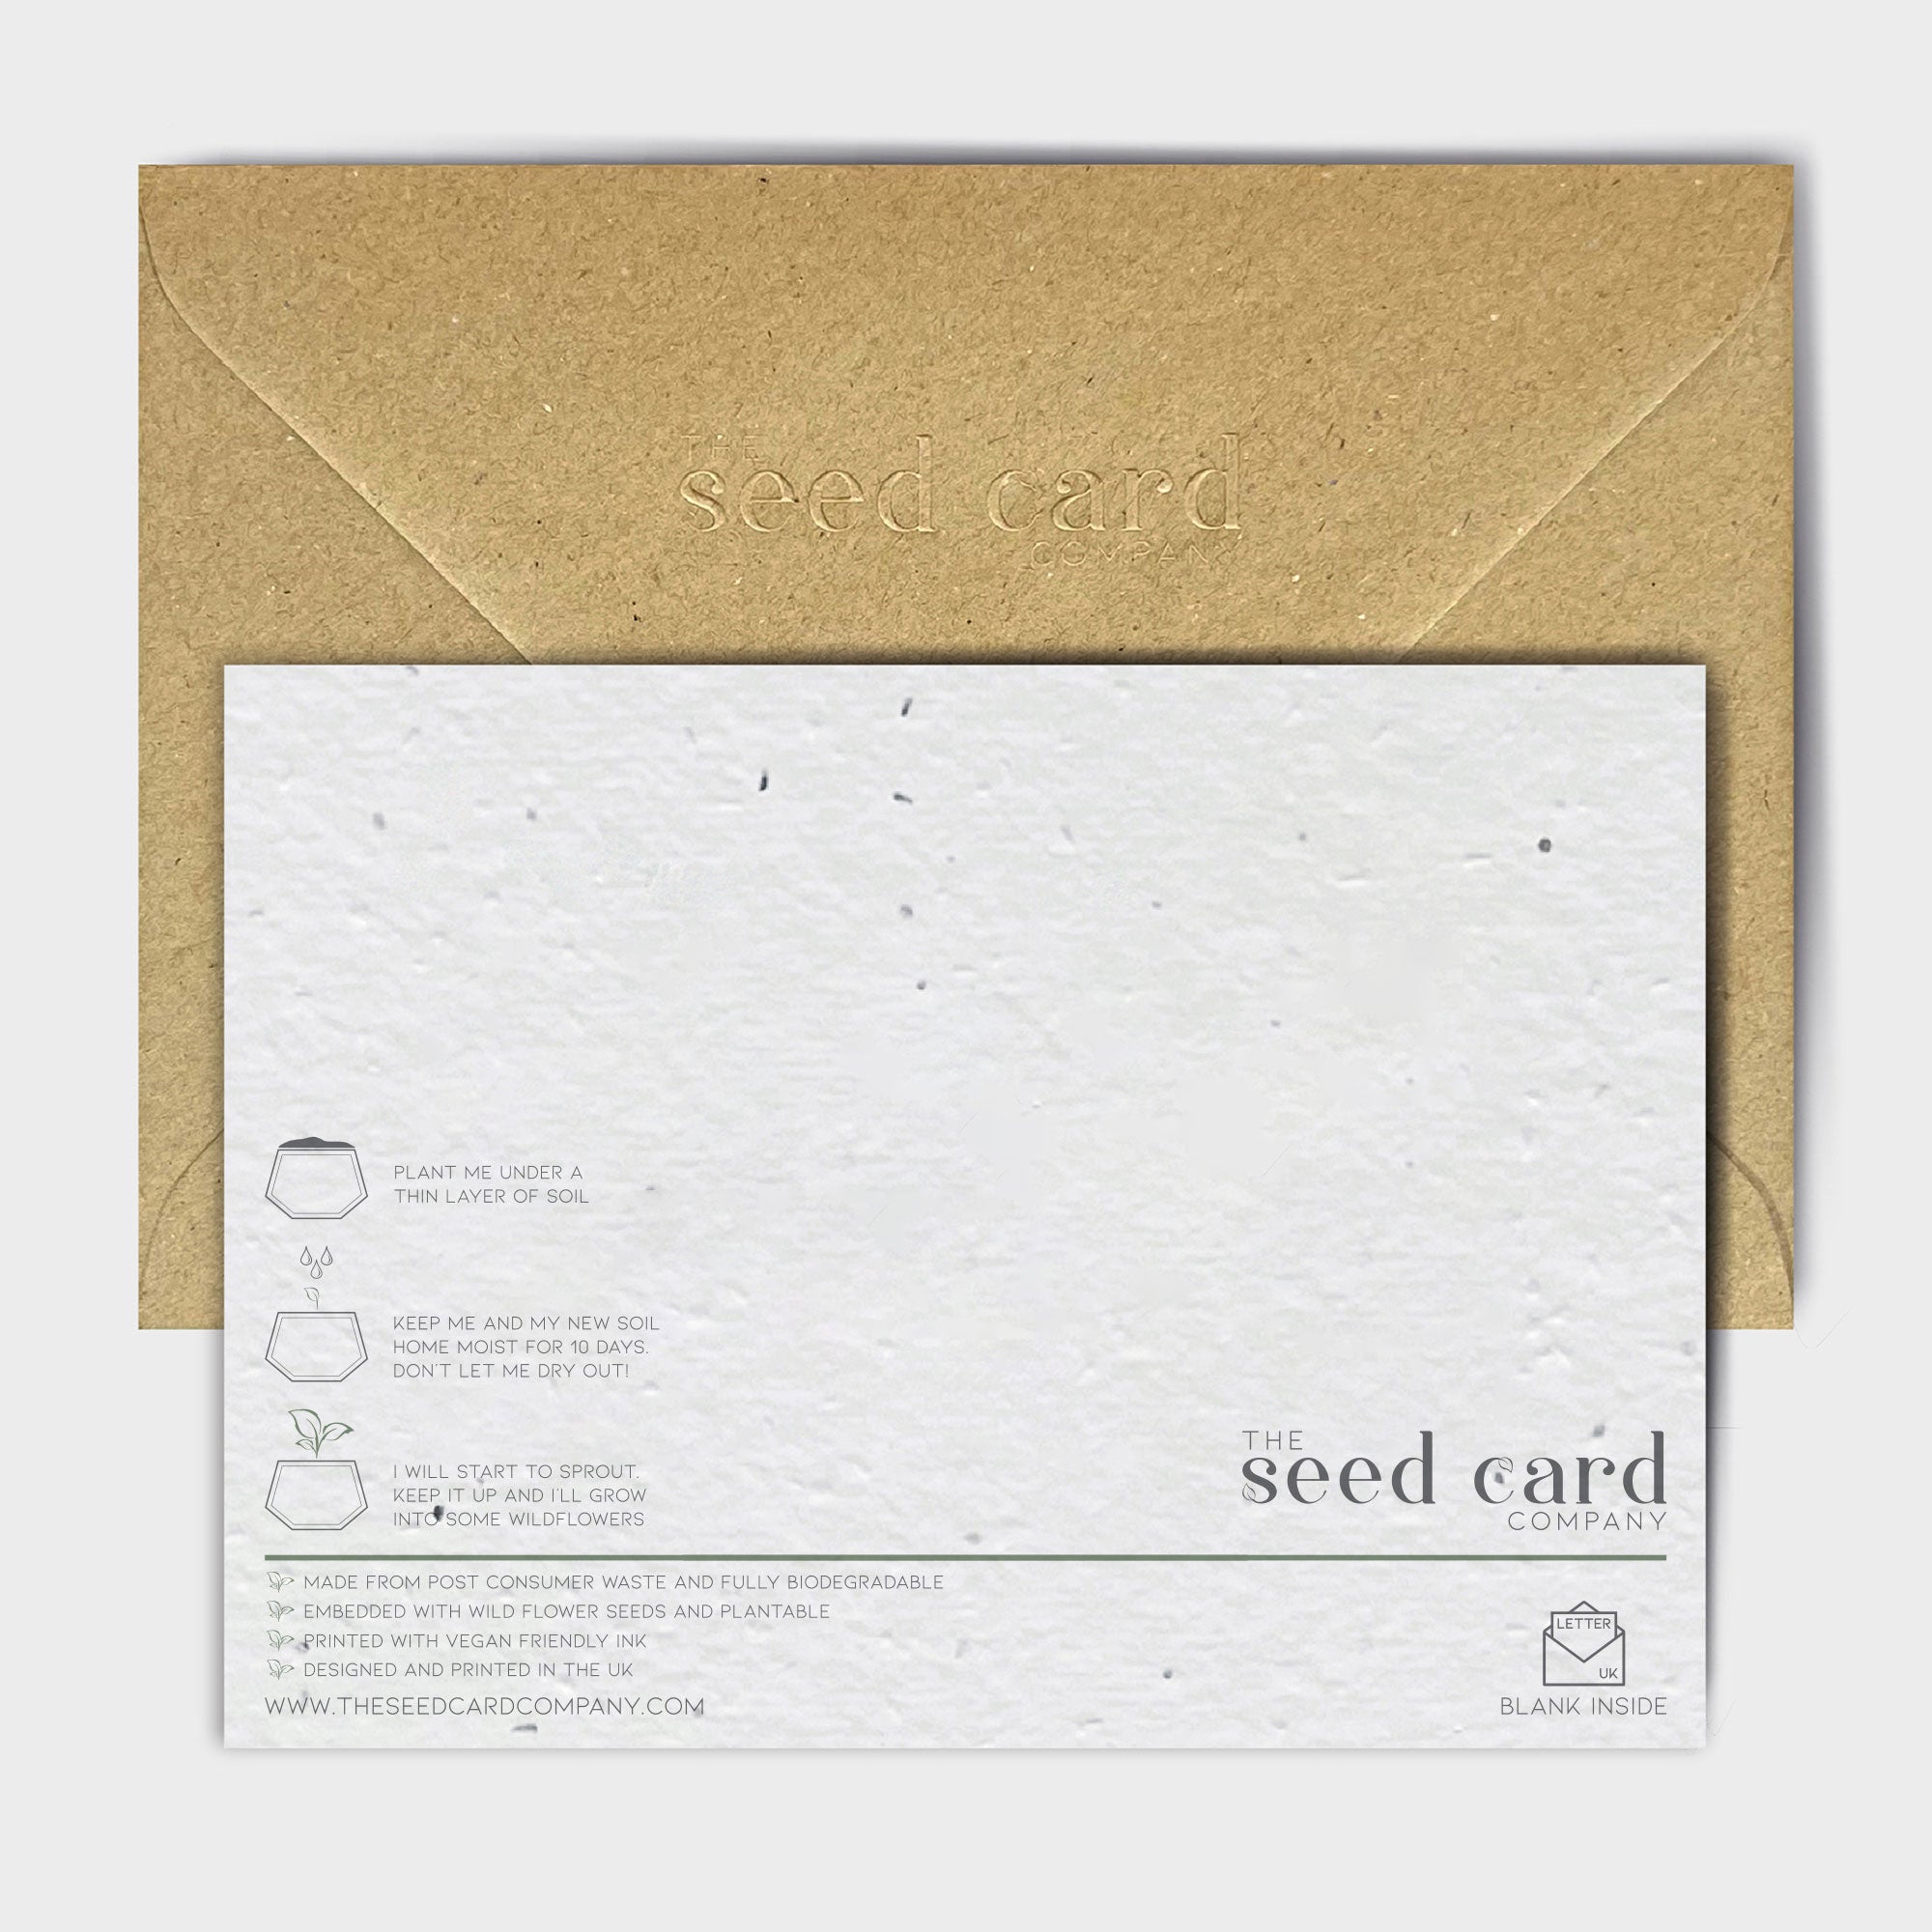 Shop online Moody Meadow - 100% biodegradable seed-embedded cards Shop -The Seed Card Company